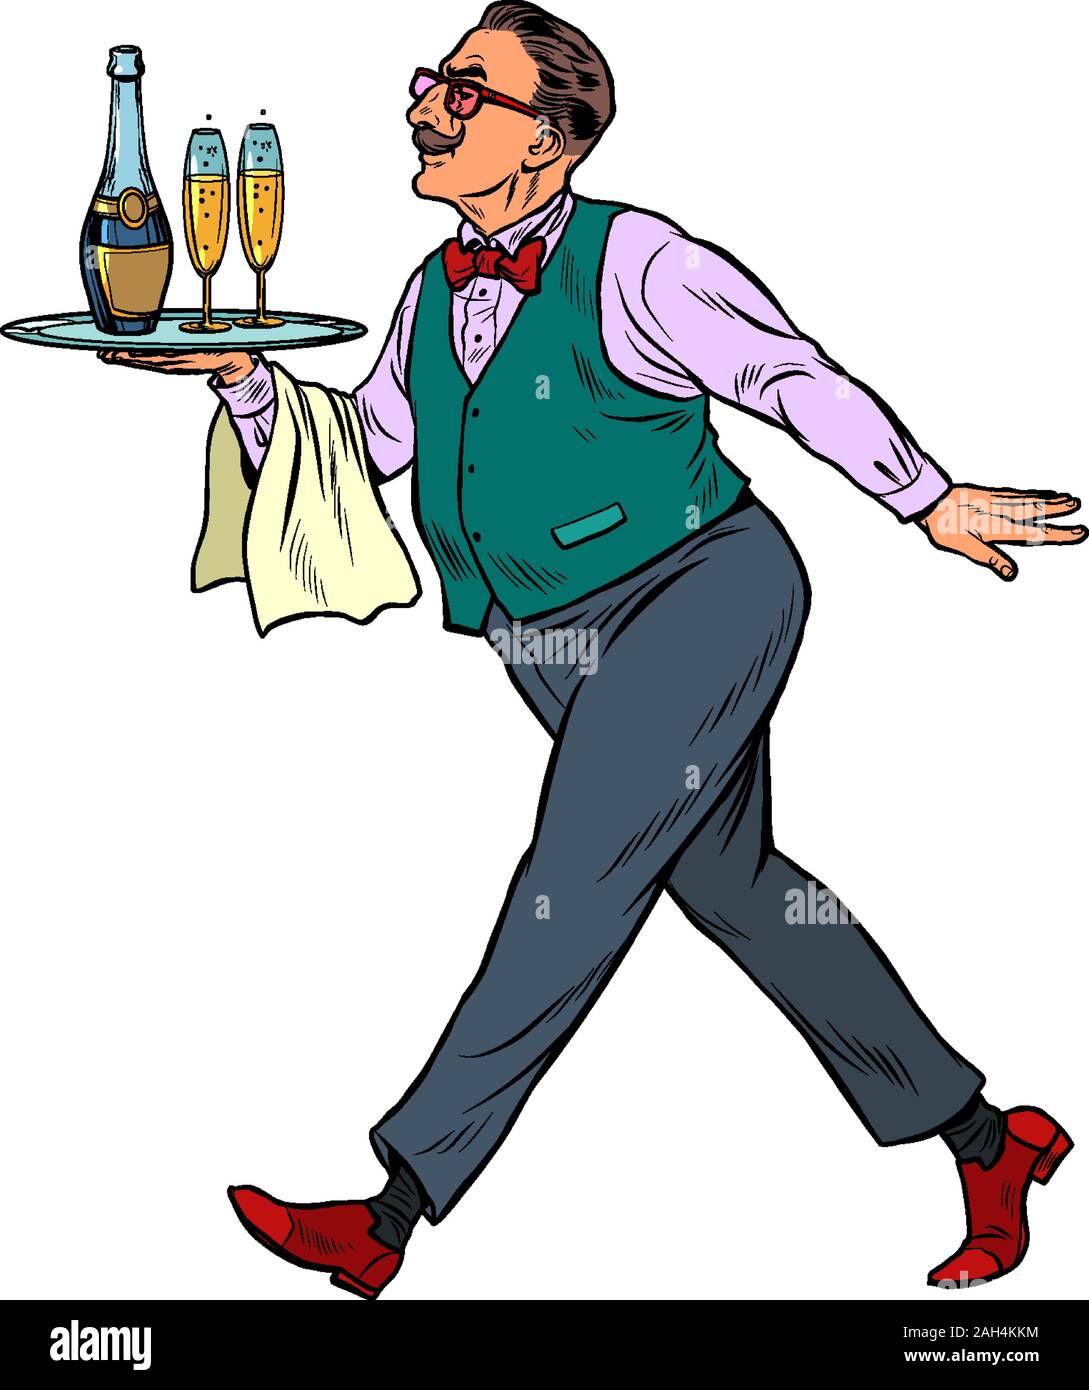 Waiter with a cap tray with glasses Stock Vector